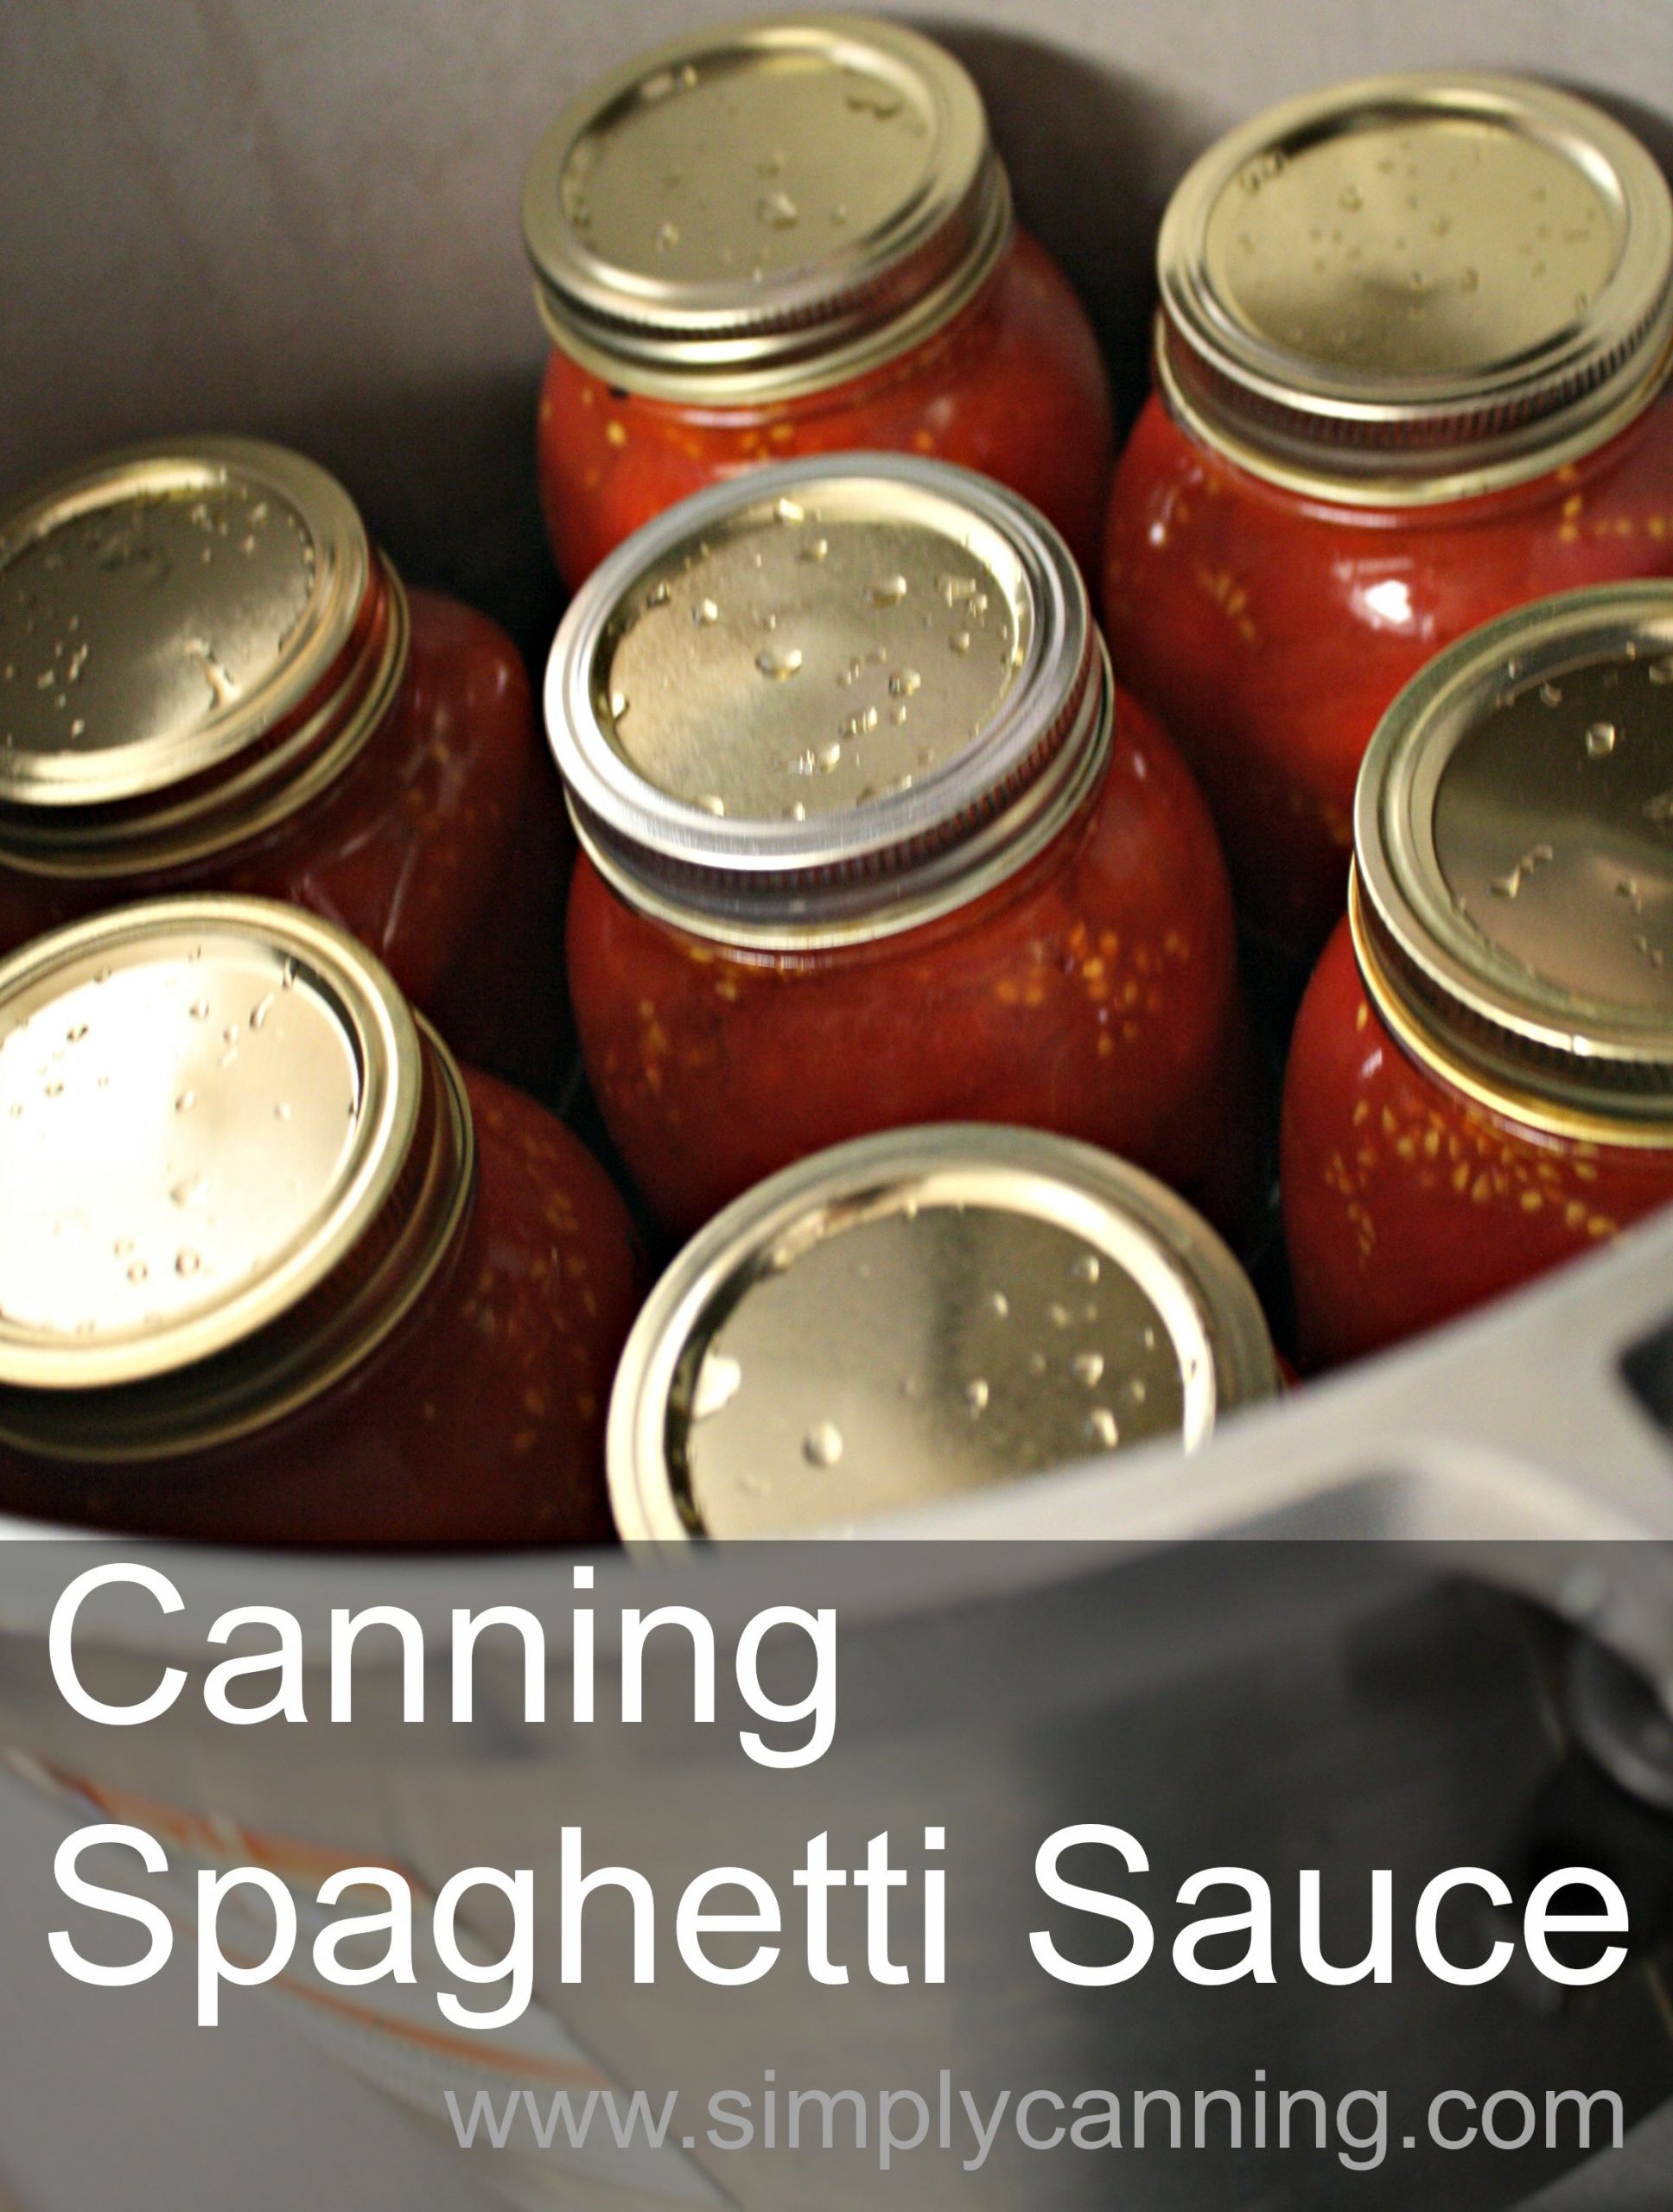 Pressure Canning Spaghetti Sauce
 Canning Spaghetti Sauce Recipe with meat that will save